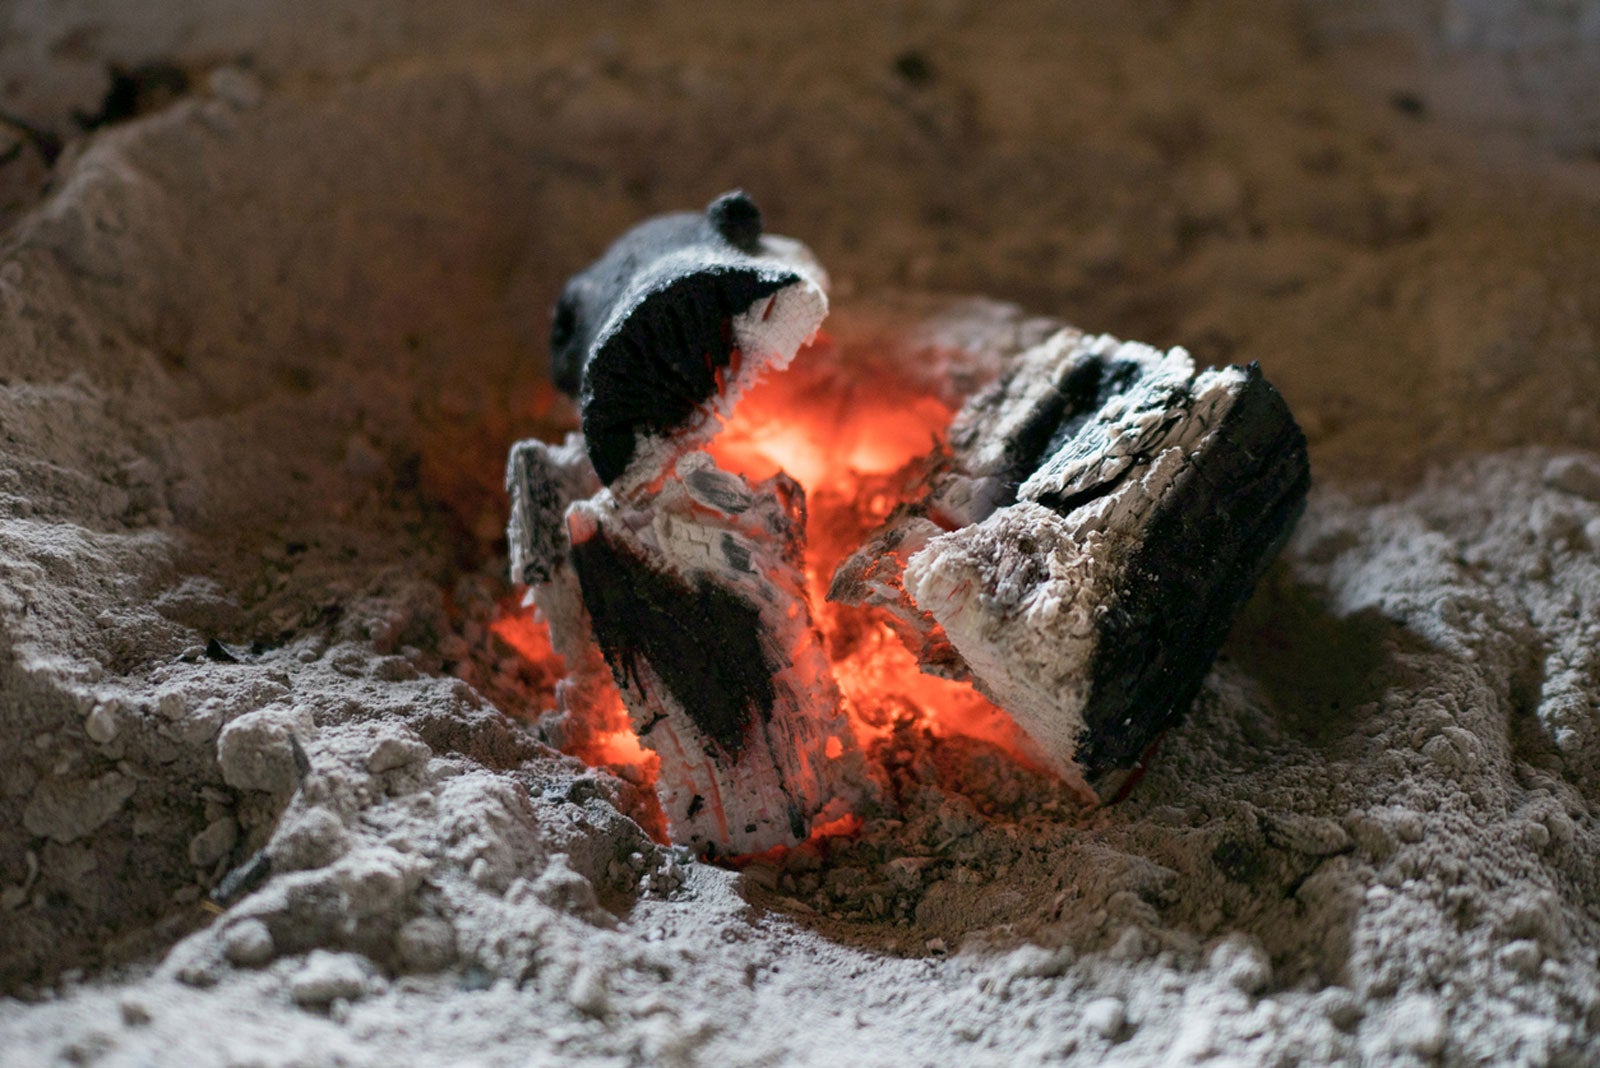 Composting Ashes Is Ash Good For Compost, How To Get Rid Of Fire Pit Ashes